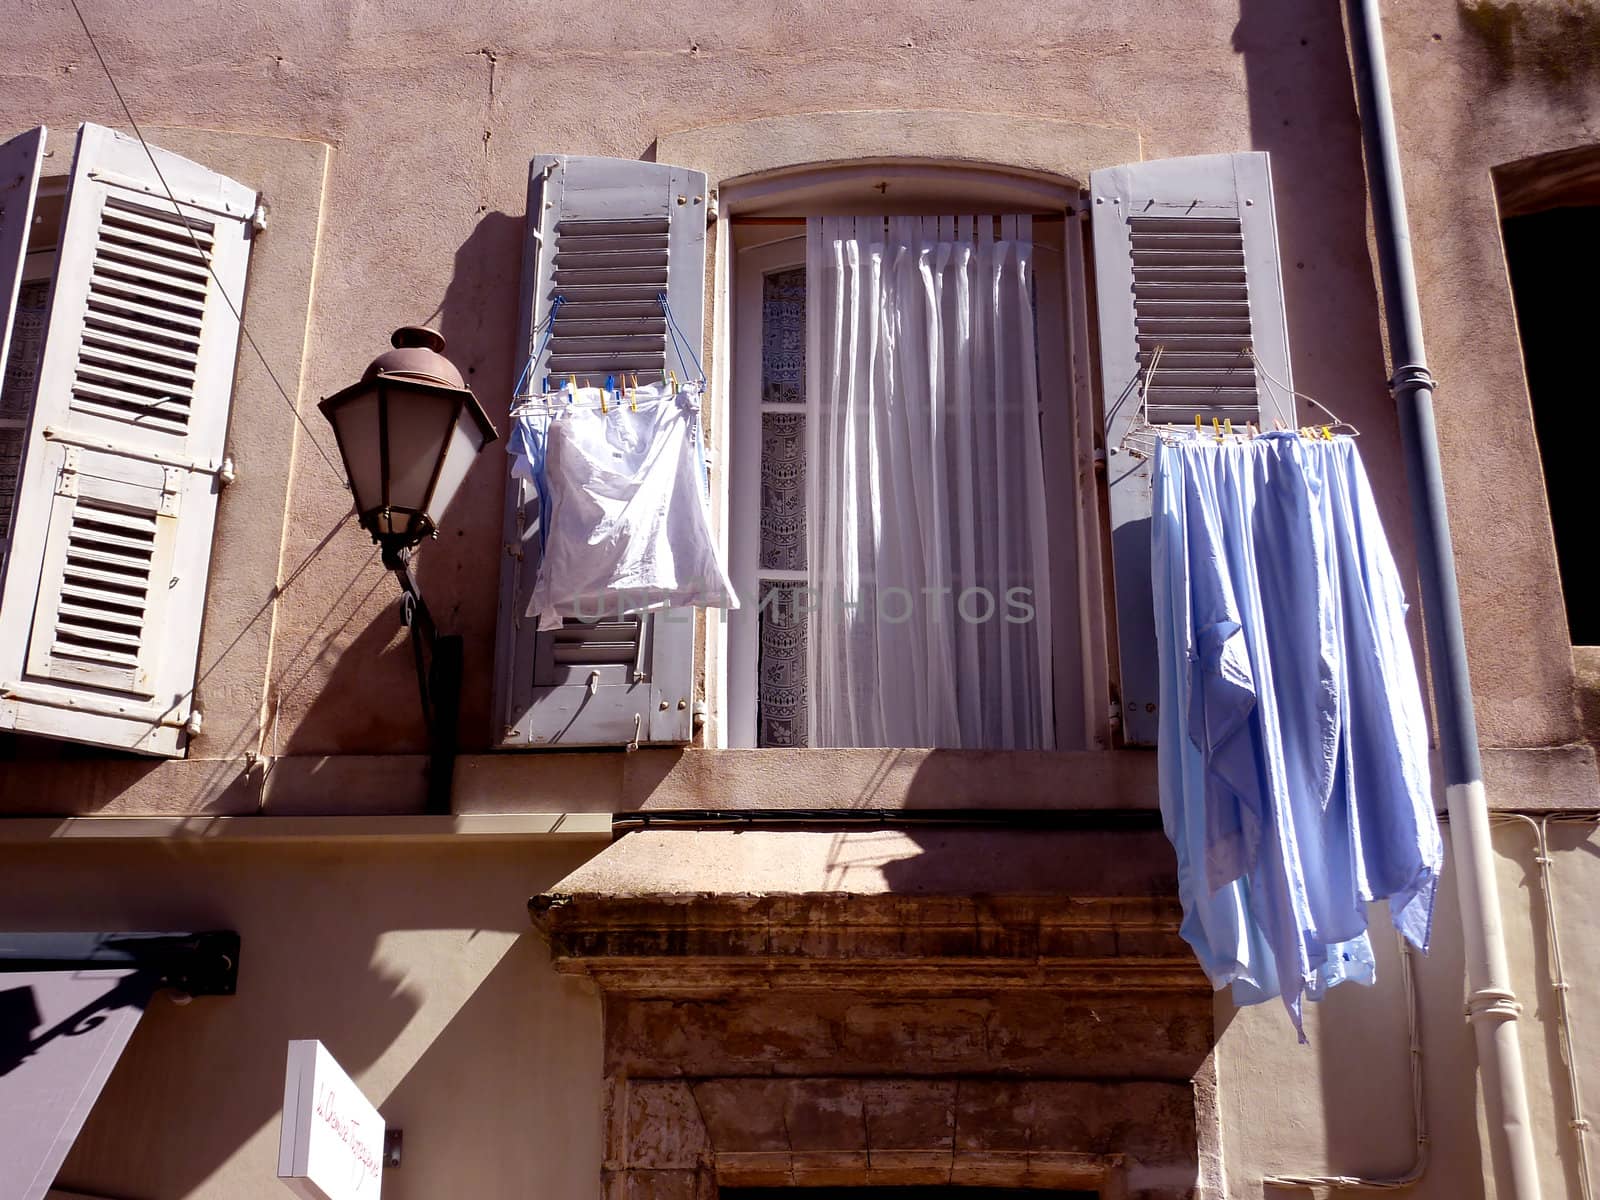 Washing drying at a window at Menton, south of France, by beautiful weather